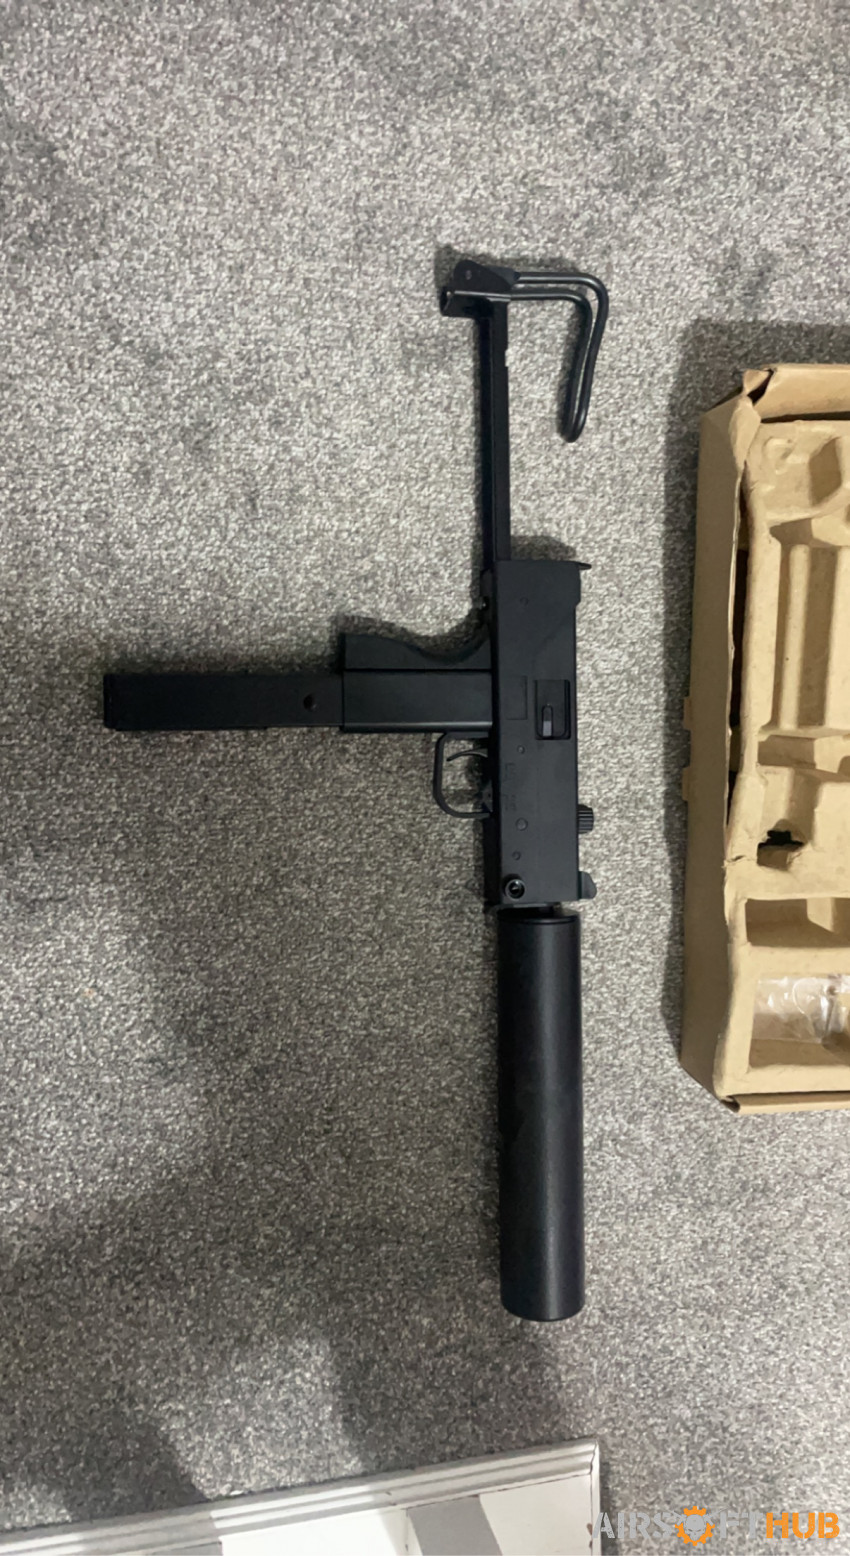 HFC gas assault eagle Mac-10 - Used airsoft equipment